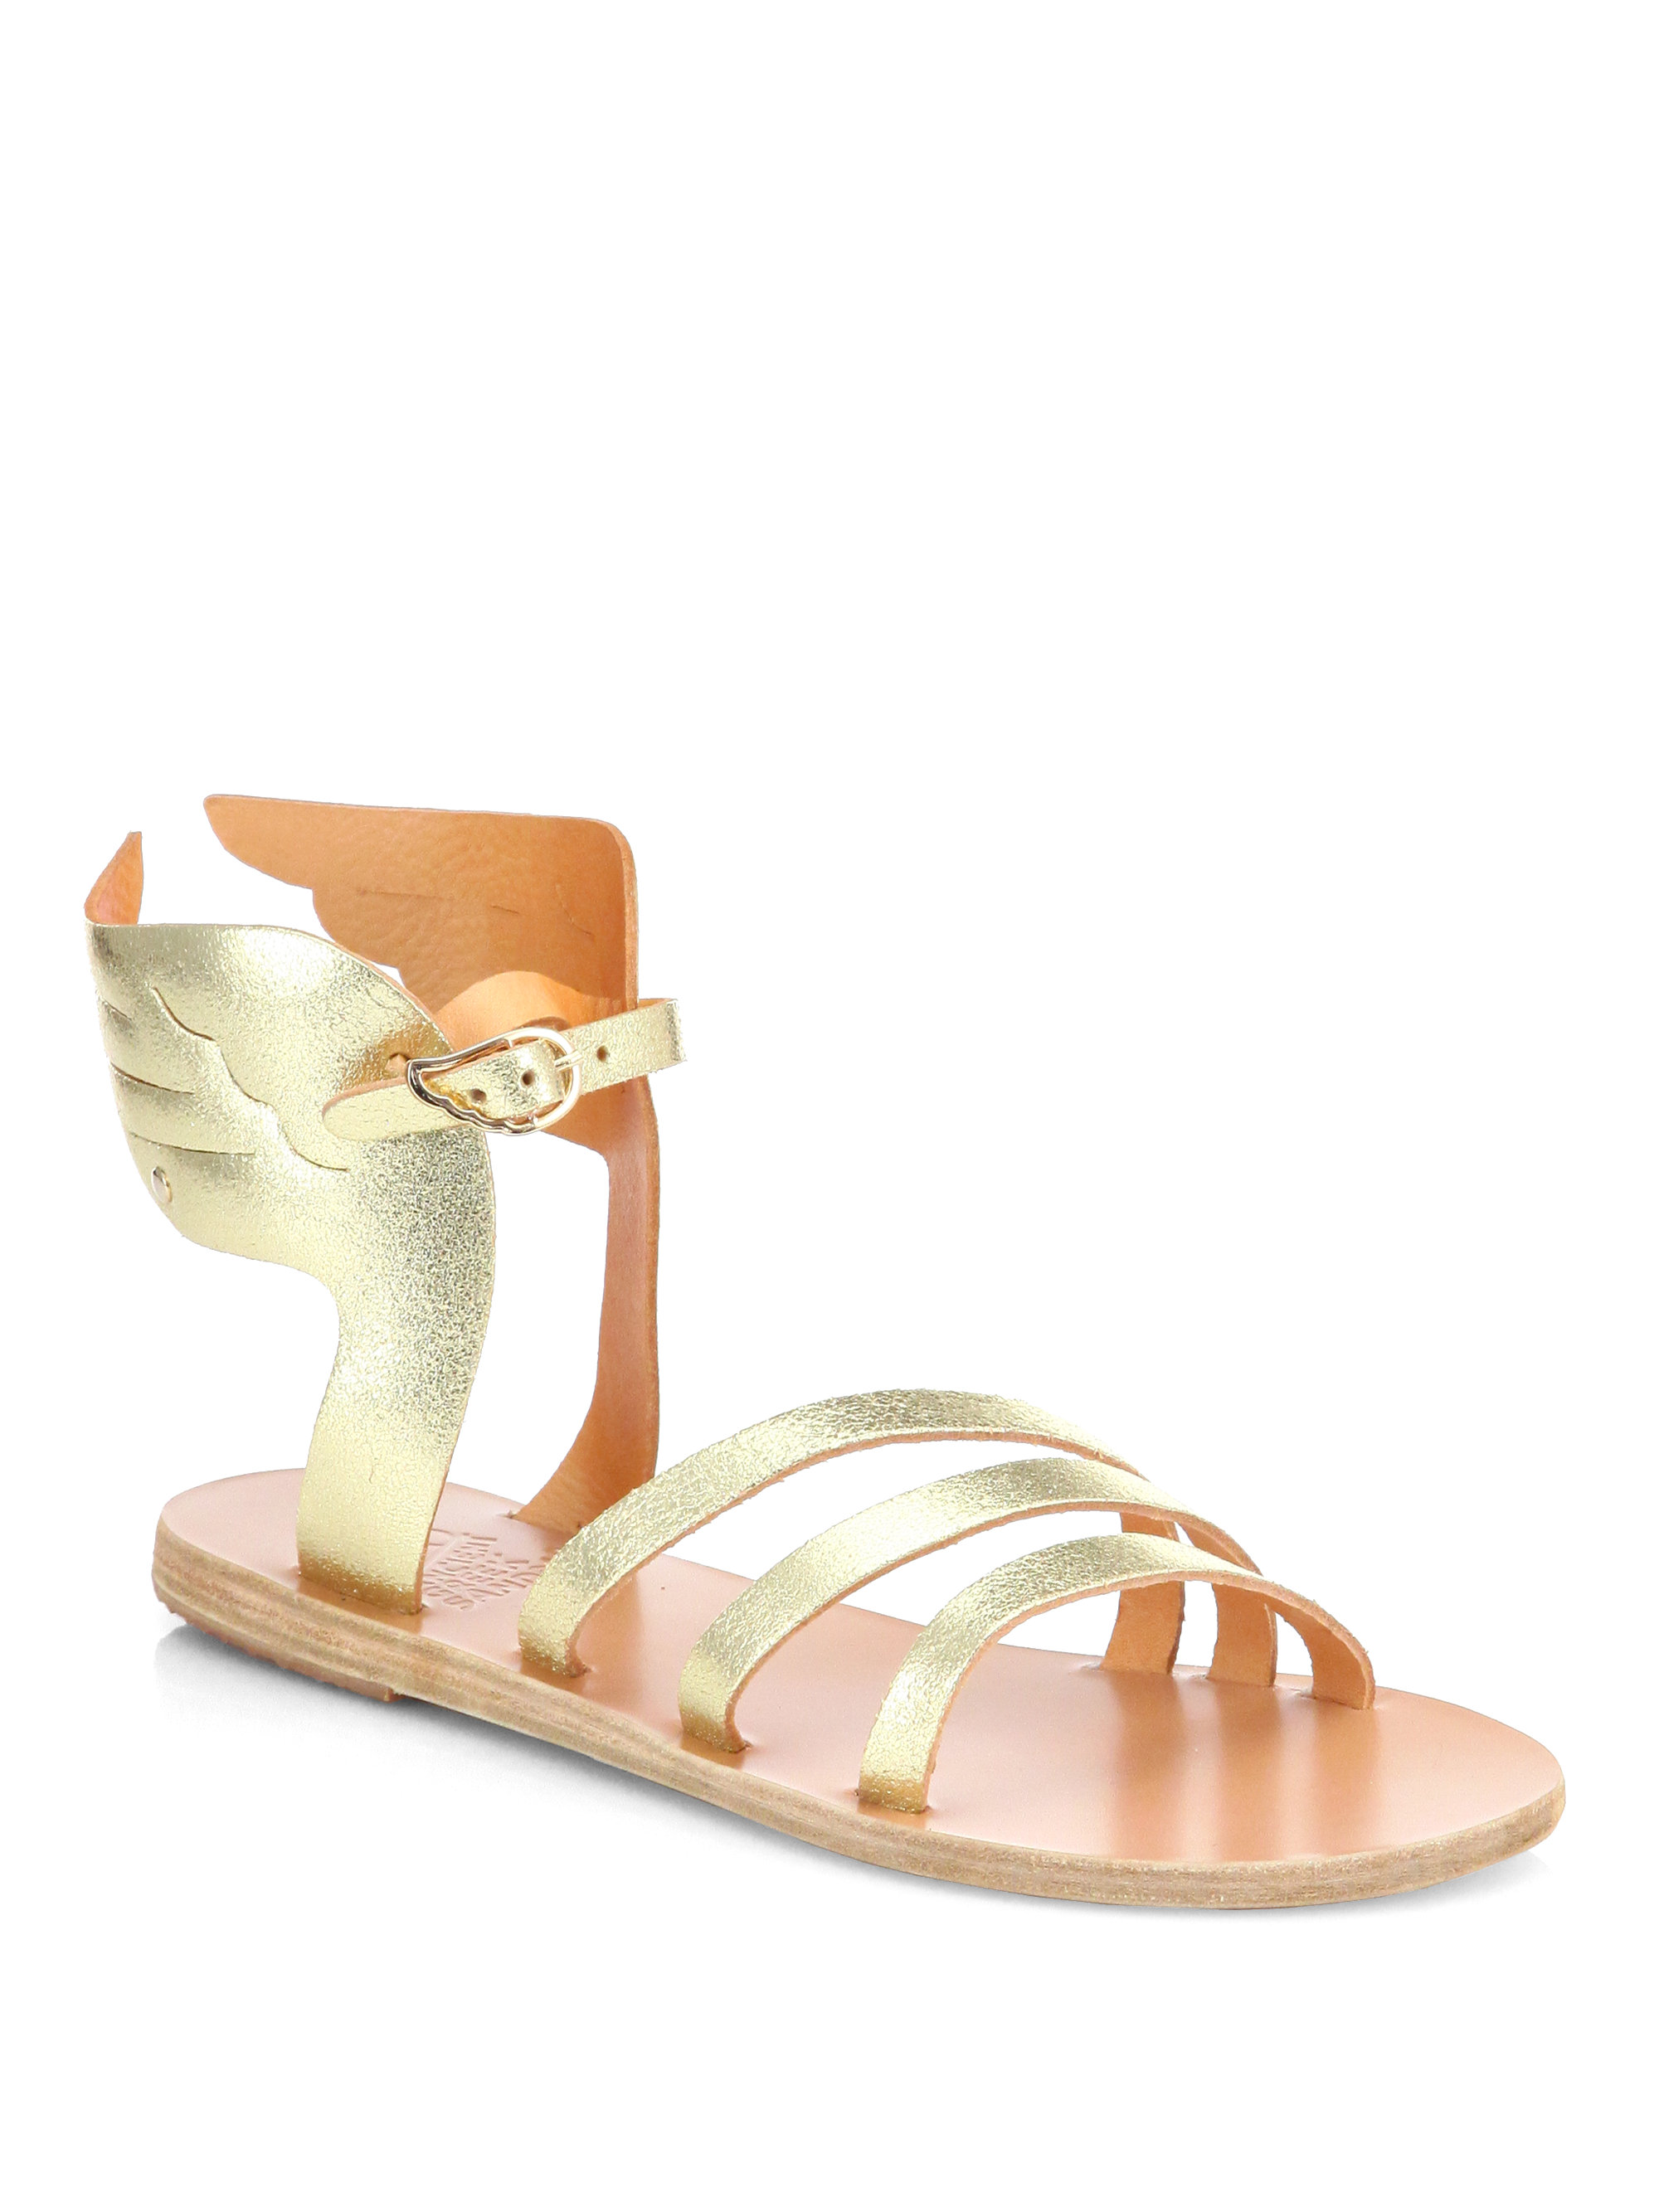 Ancient Greek Sandals Ikaria Winged Metallic Leather Sandals in Gold ...